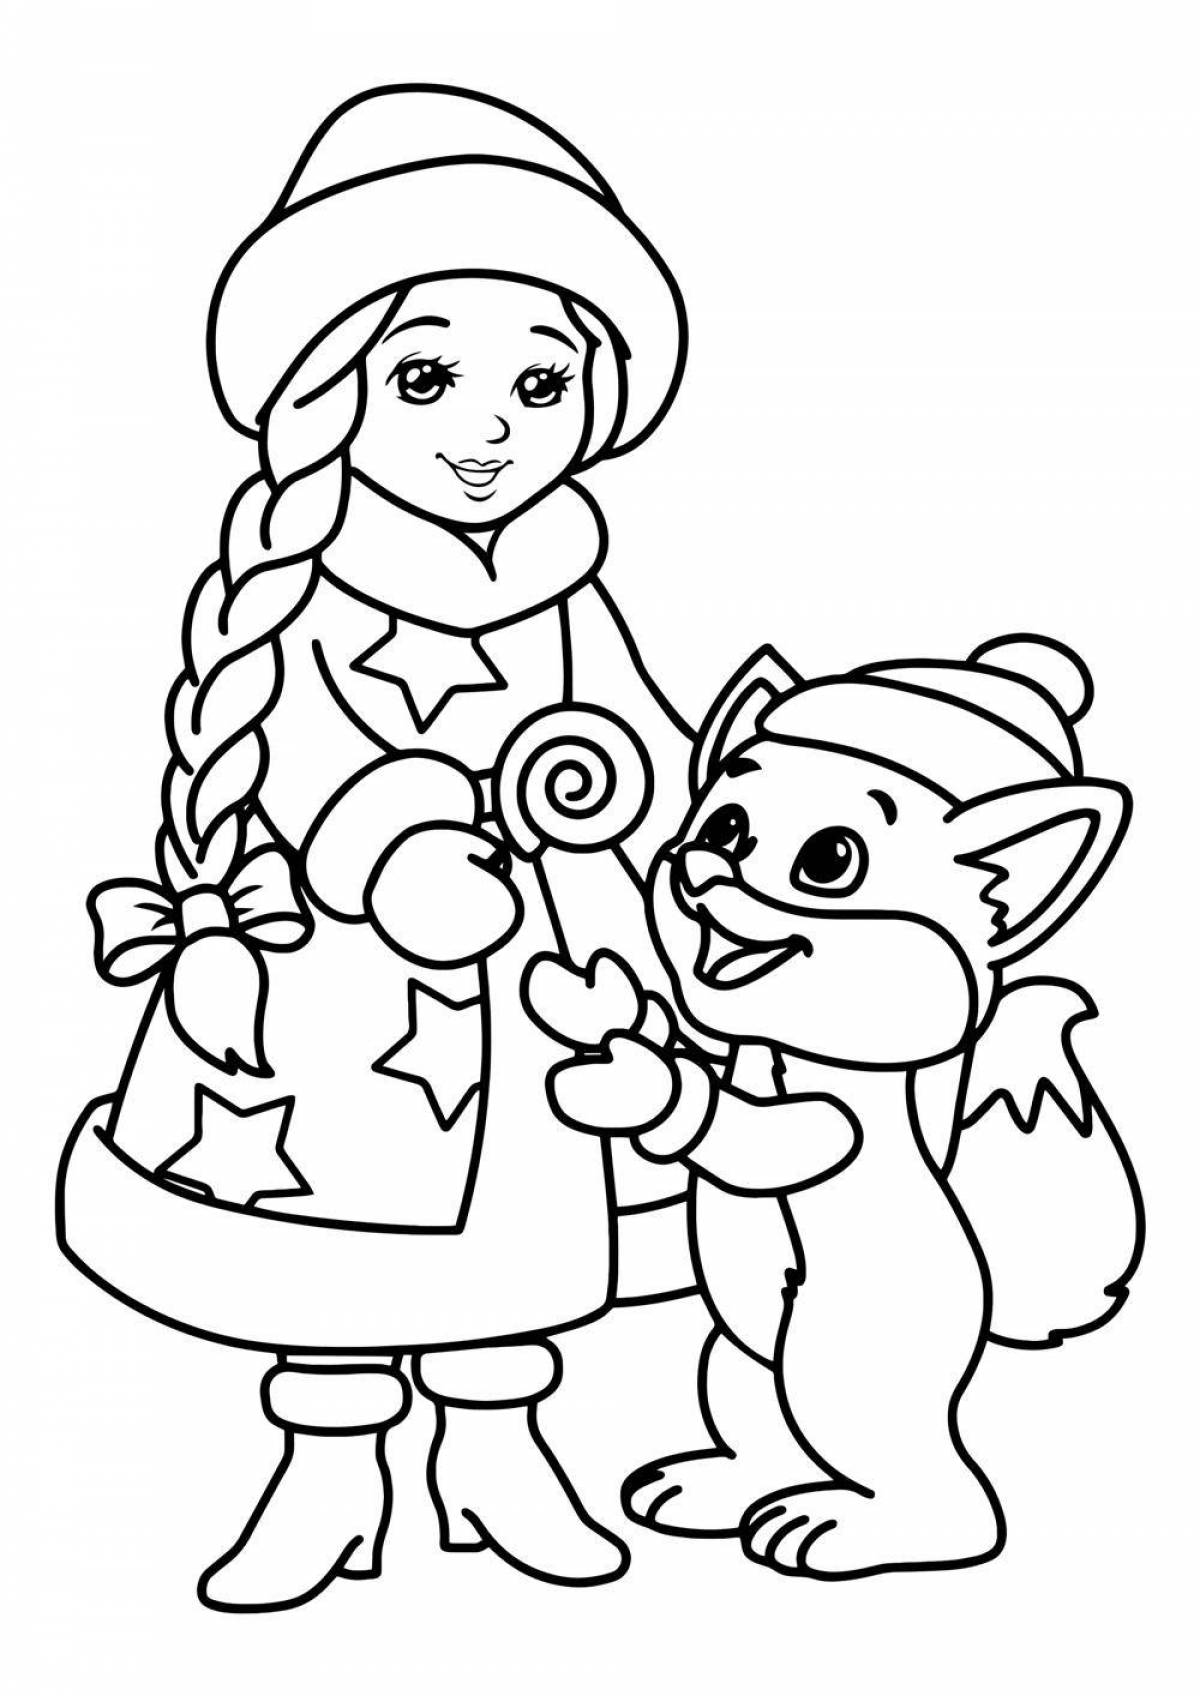 Coloring playful Christmas Snow Maiden